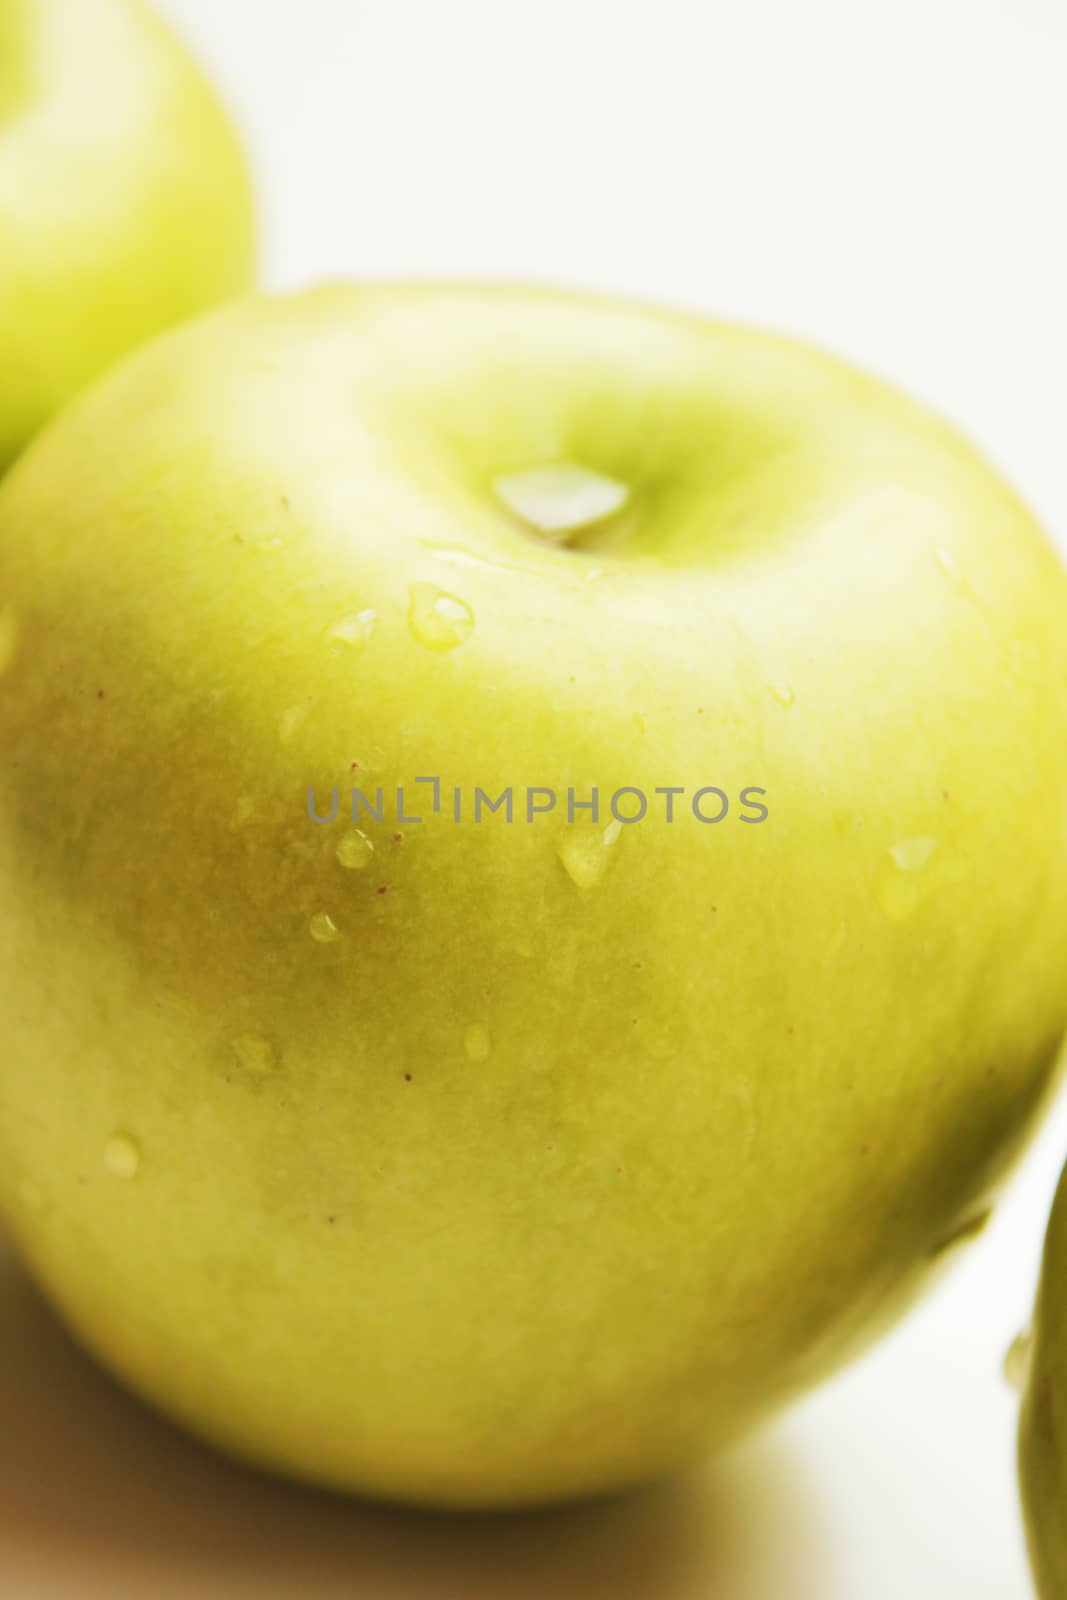 Fresh delicious looking green apples.